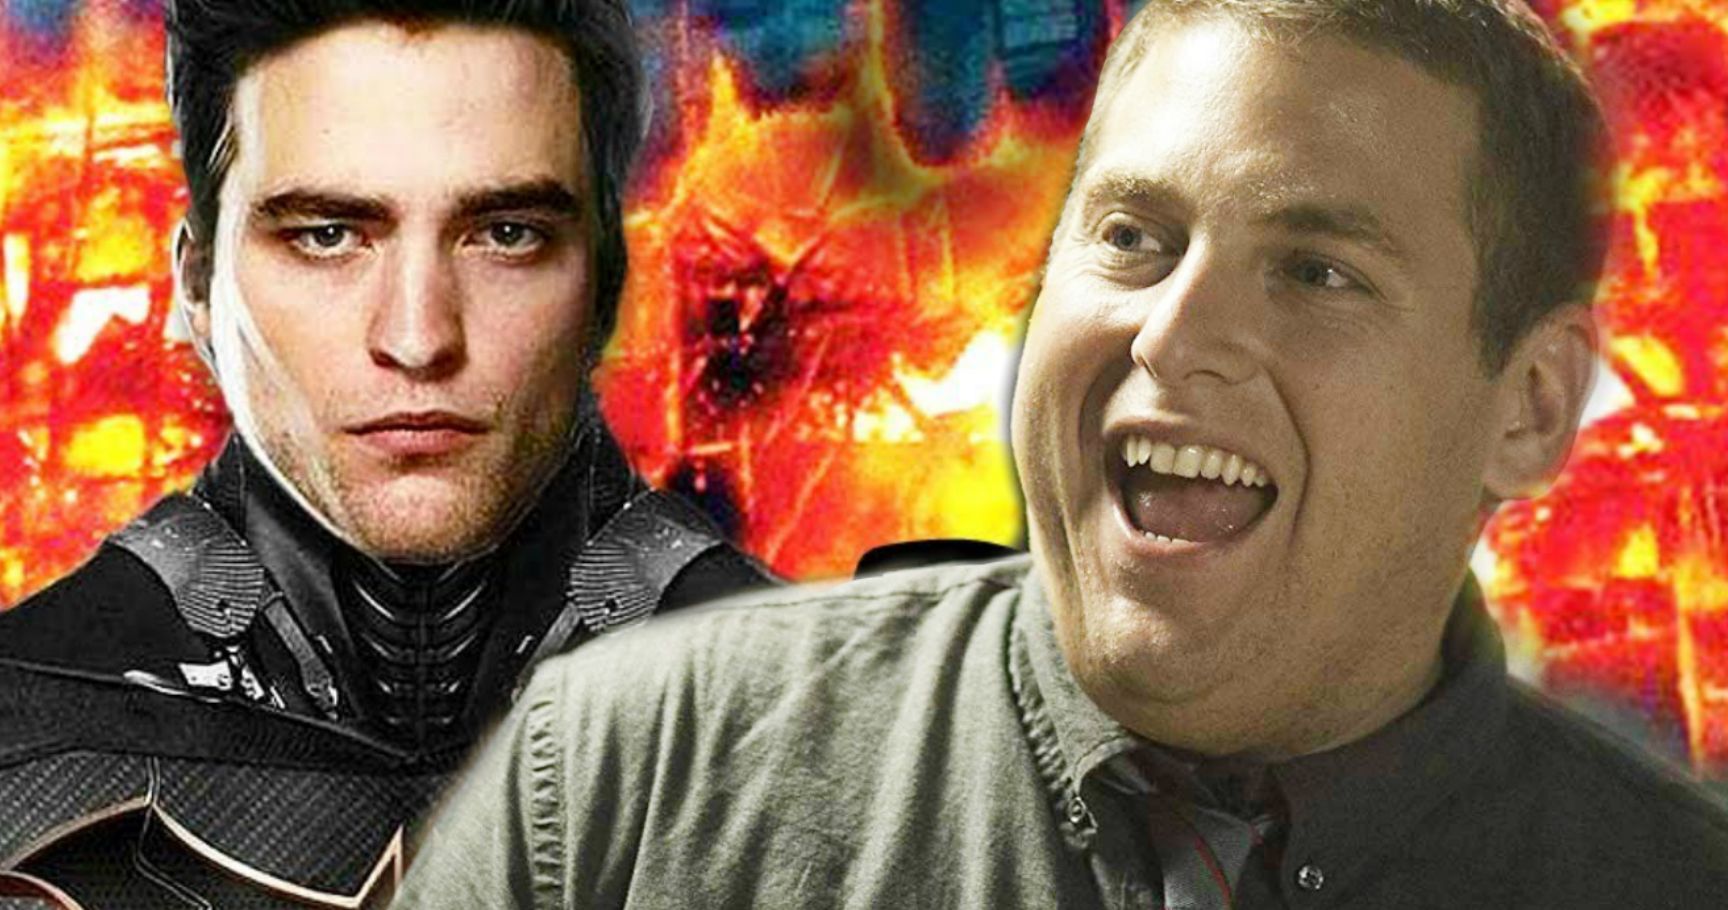 Jonah Hill Asking $10M for The Batman, More Than Double Robert Pattinson's Payday?